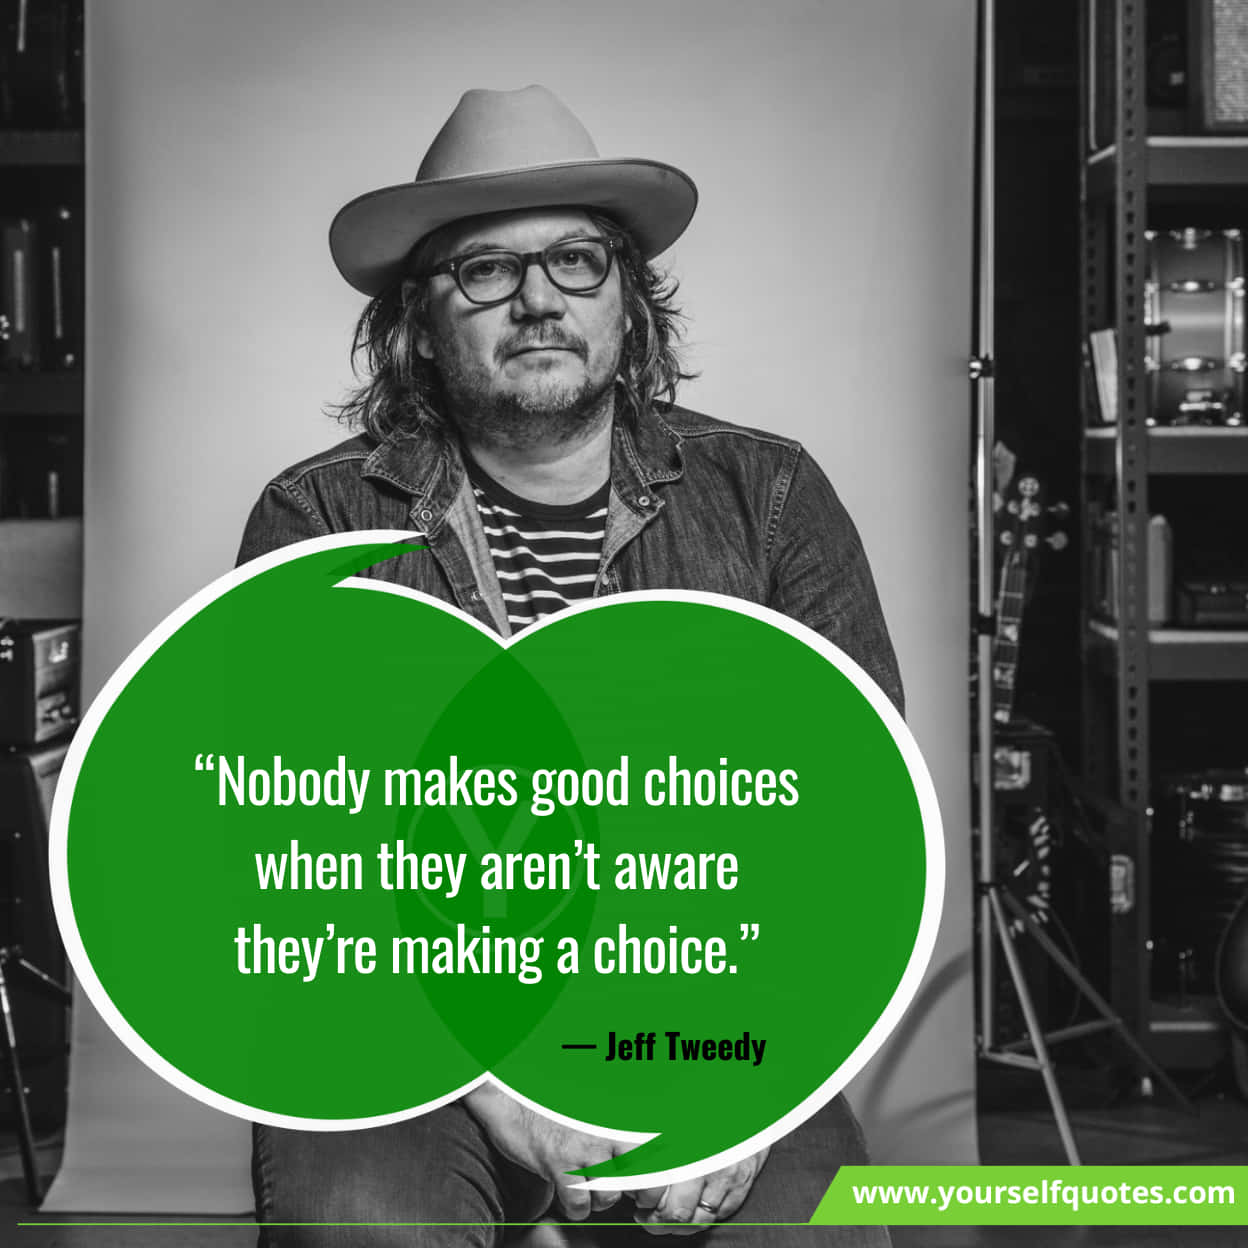 Jeff Tweedy Quotes On Discovering Self